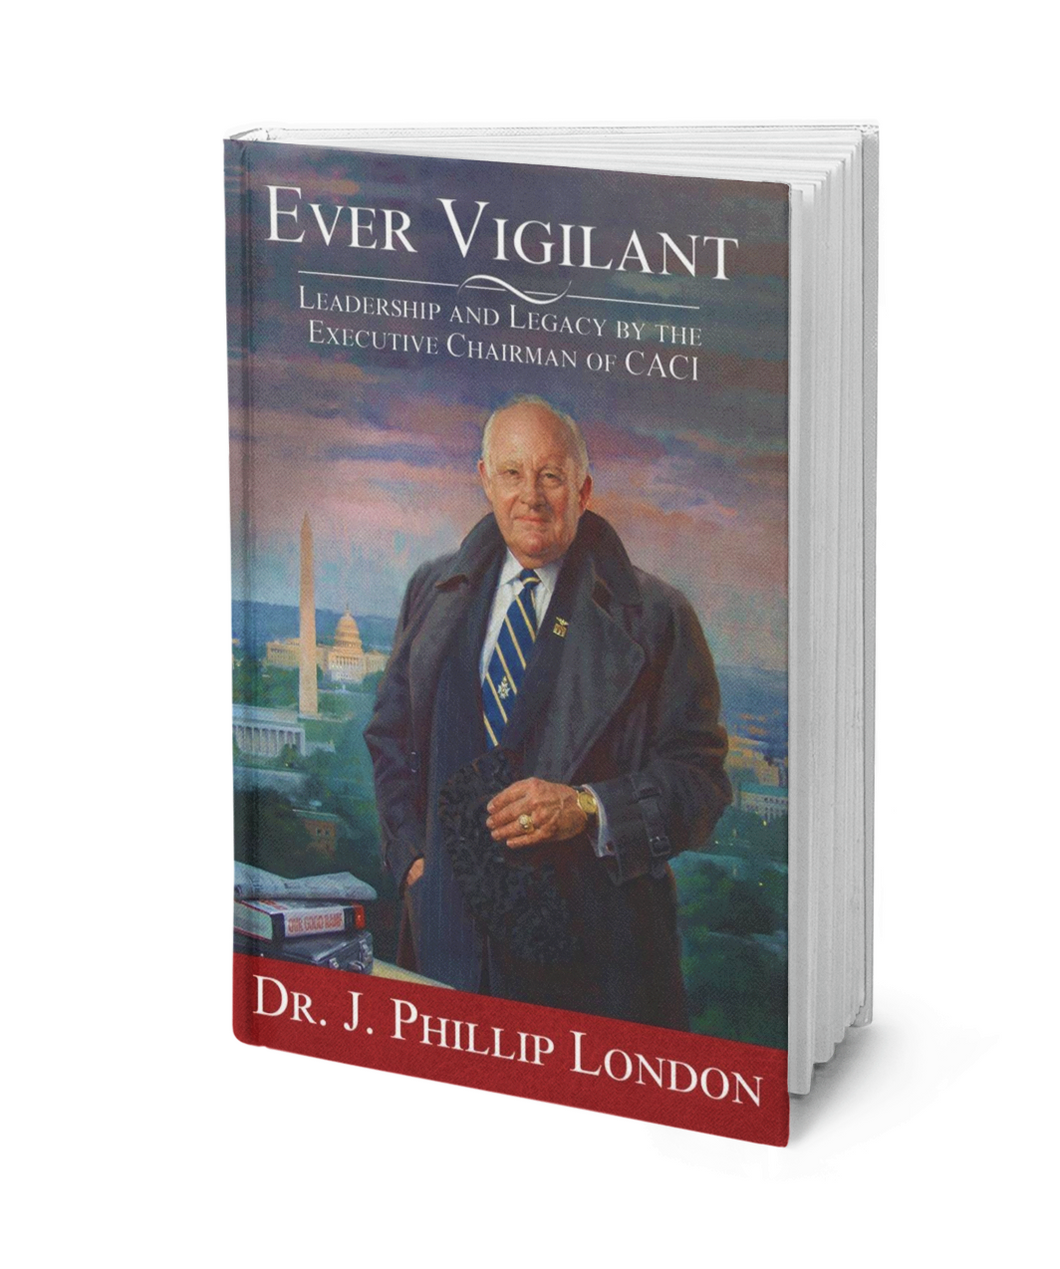 EVER VIGILANT | Leadership and Legacy by the Executive Chairman of CACI